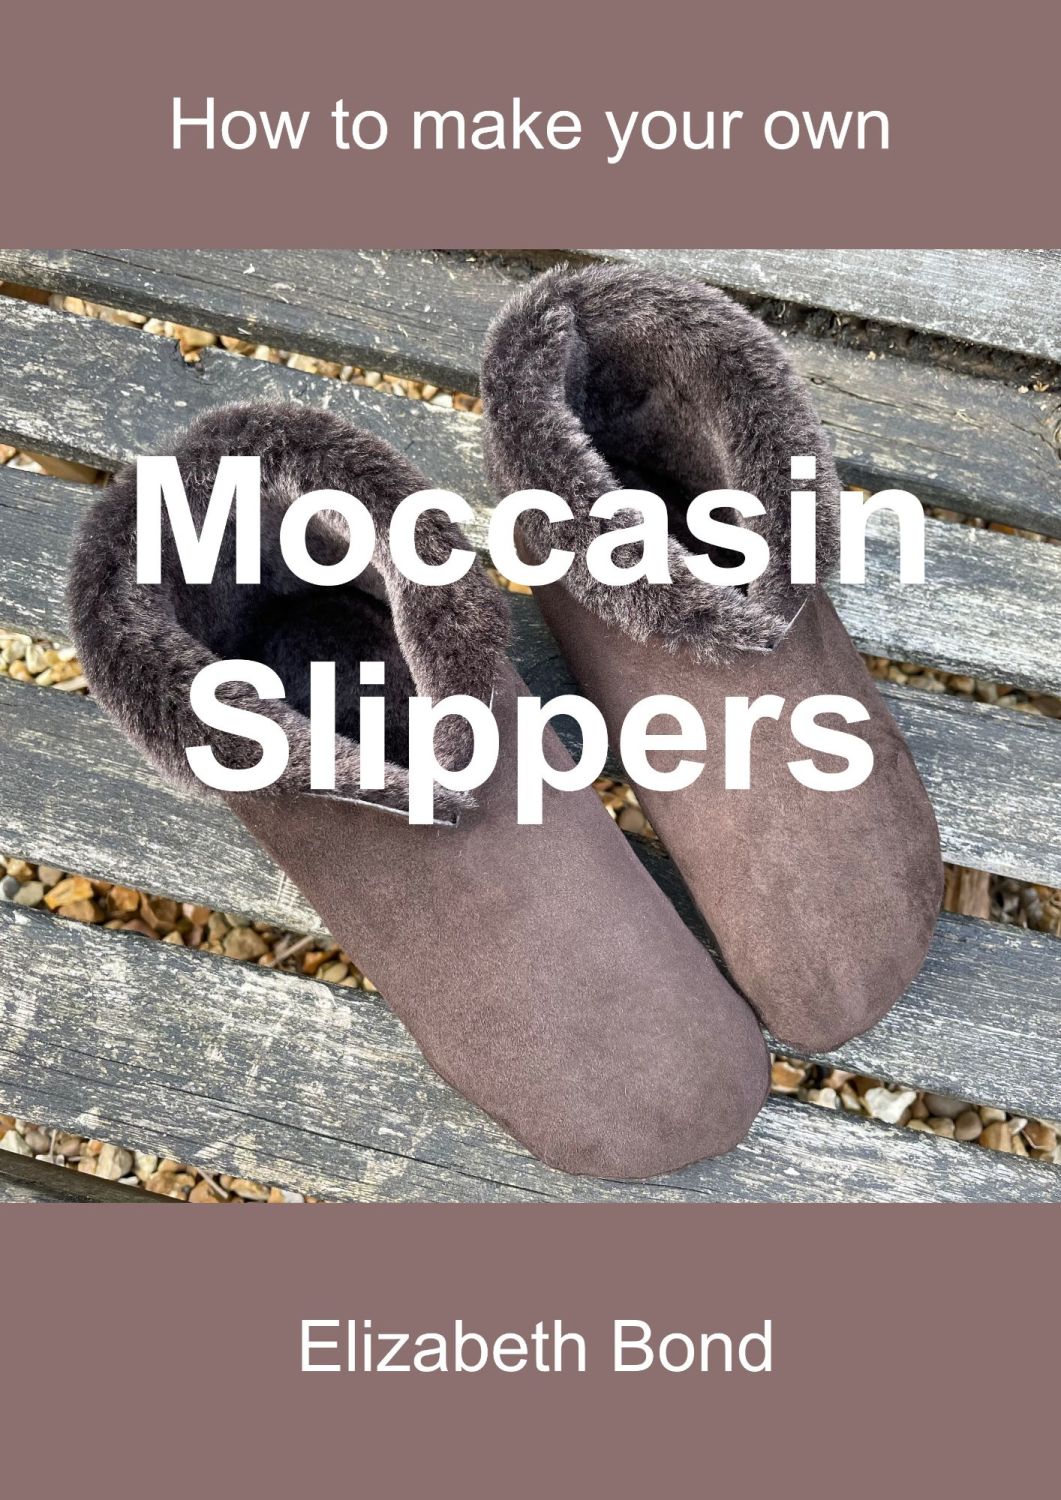 How to make your own moccasin slippers